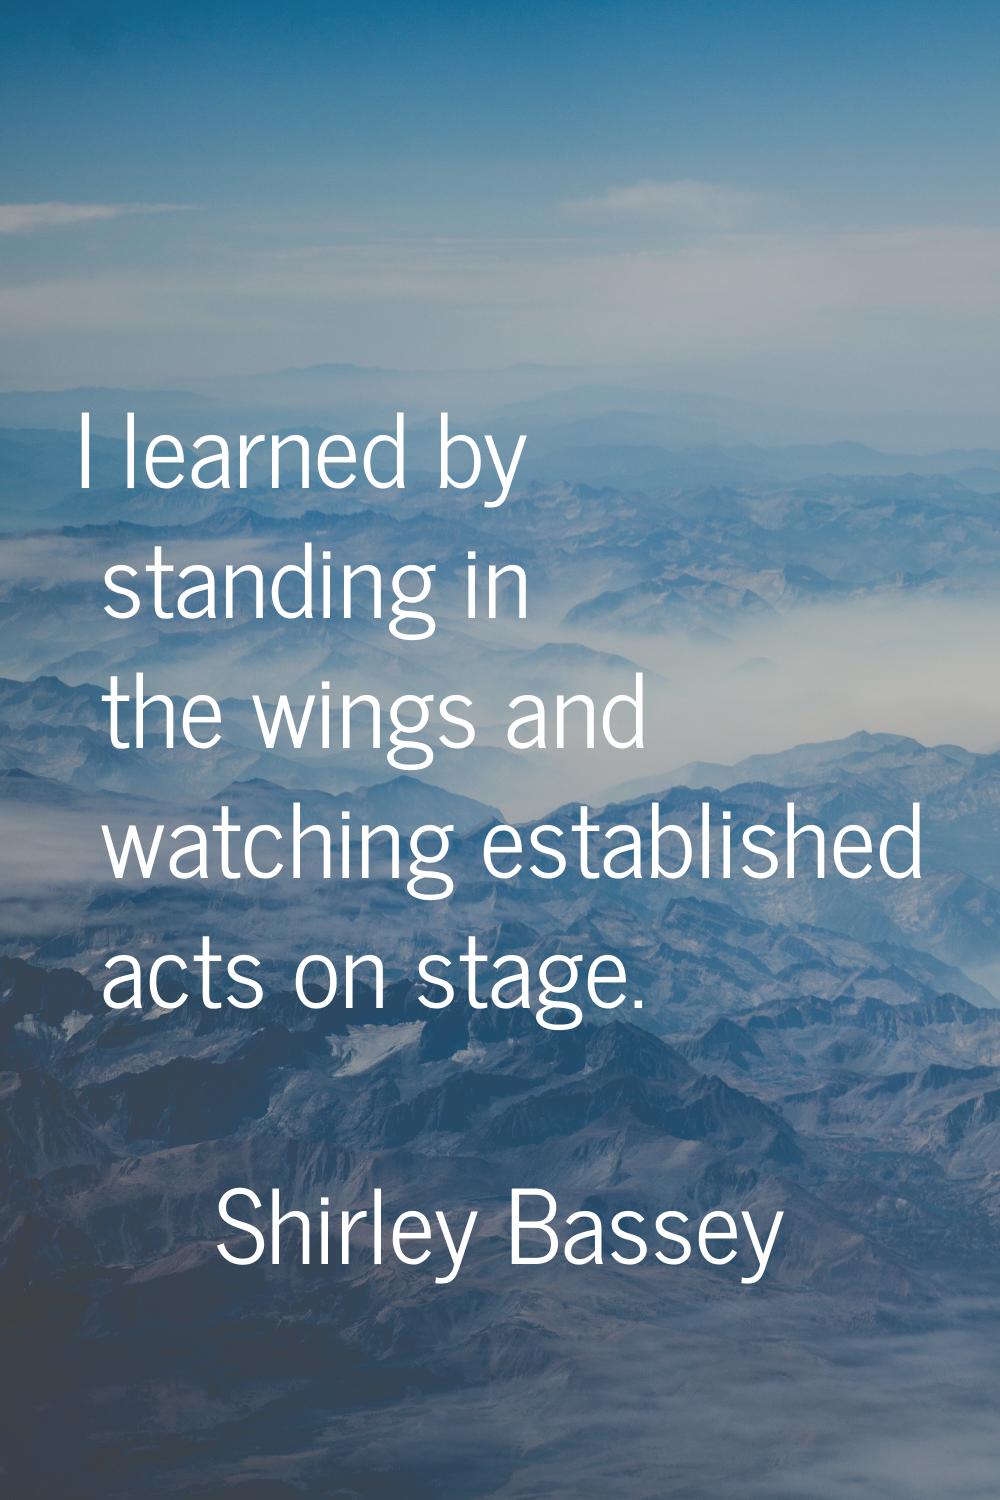 I learned by standing in the wings and watching established acts on stage.